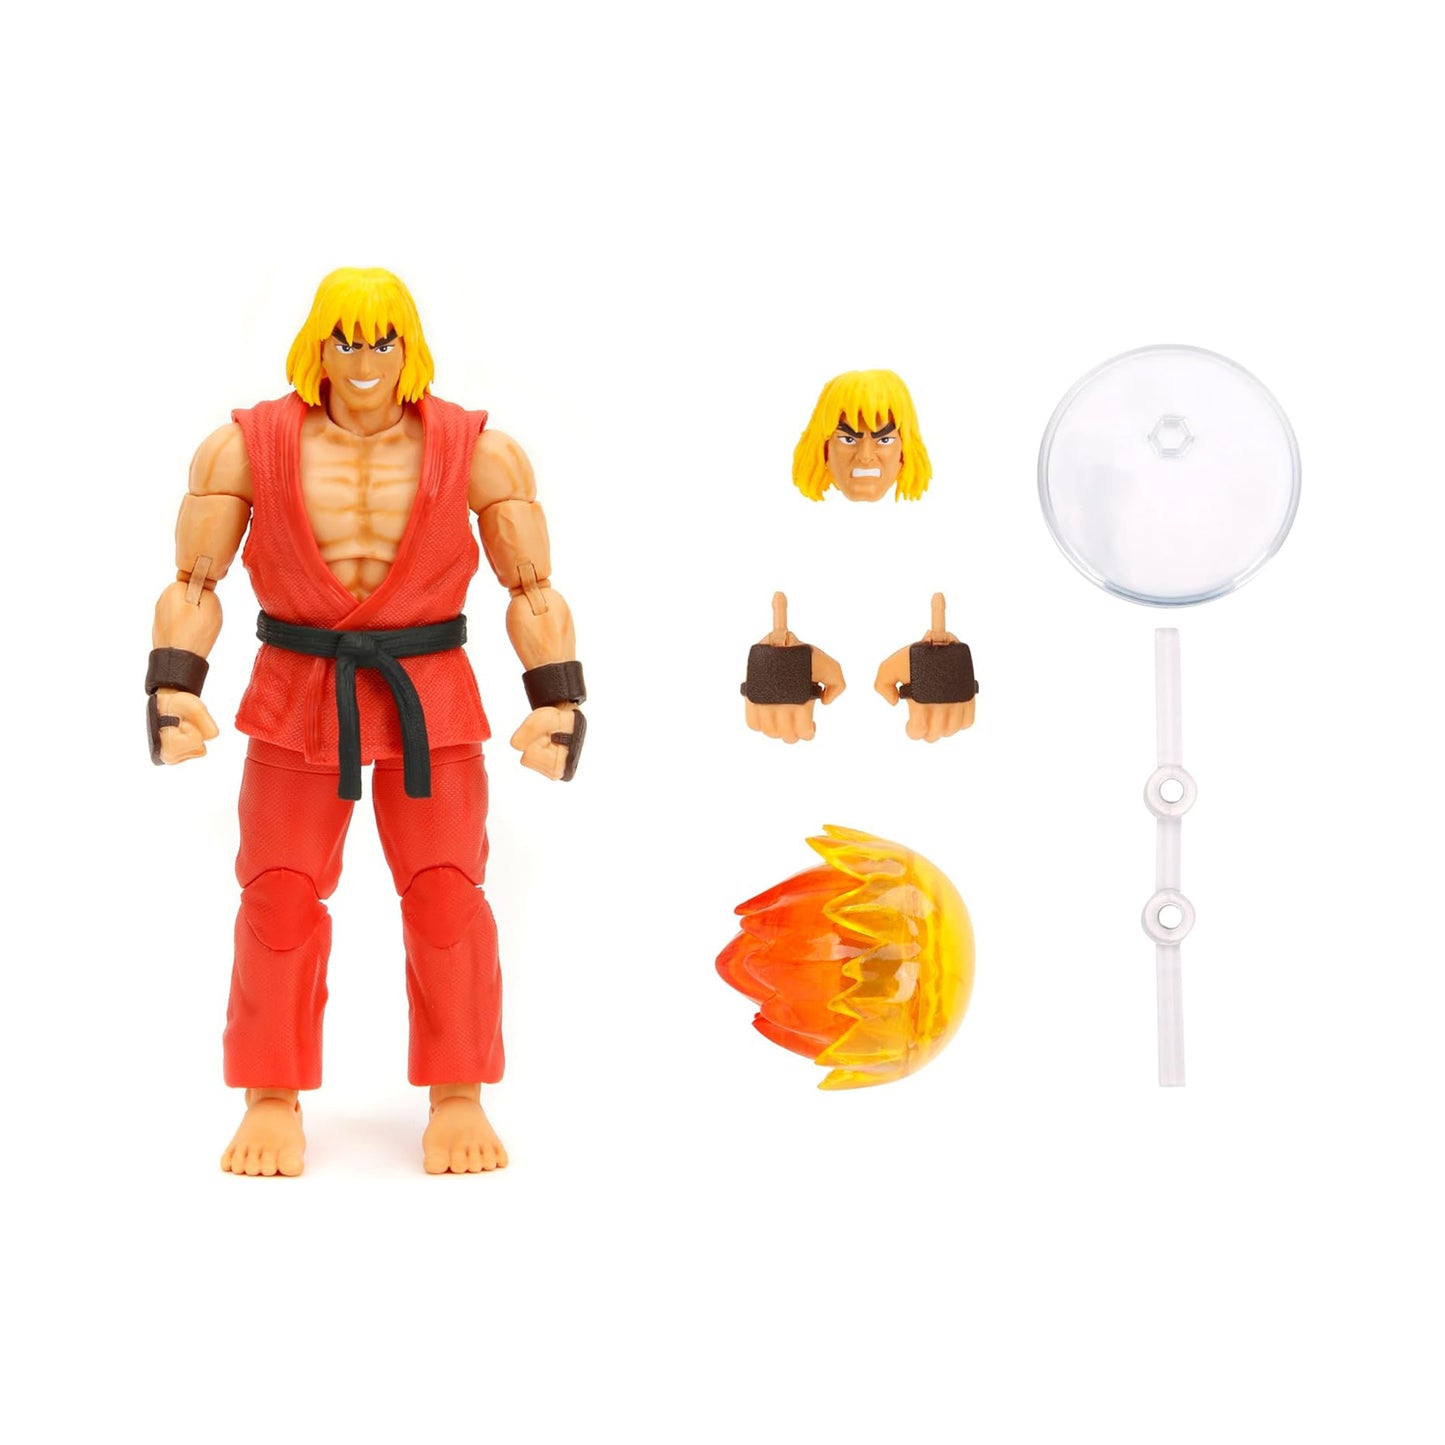 Ken 6-Inch Action Figure from Street Fighter II: The Final Challengers